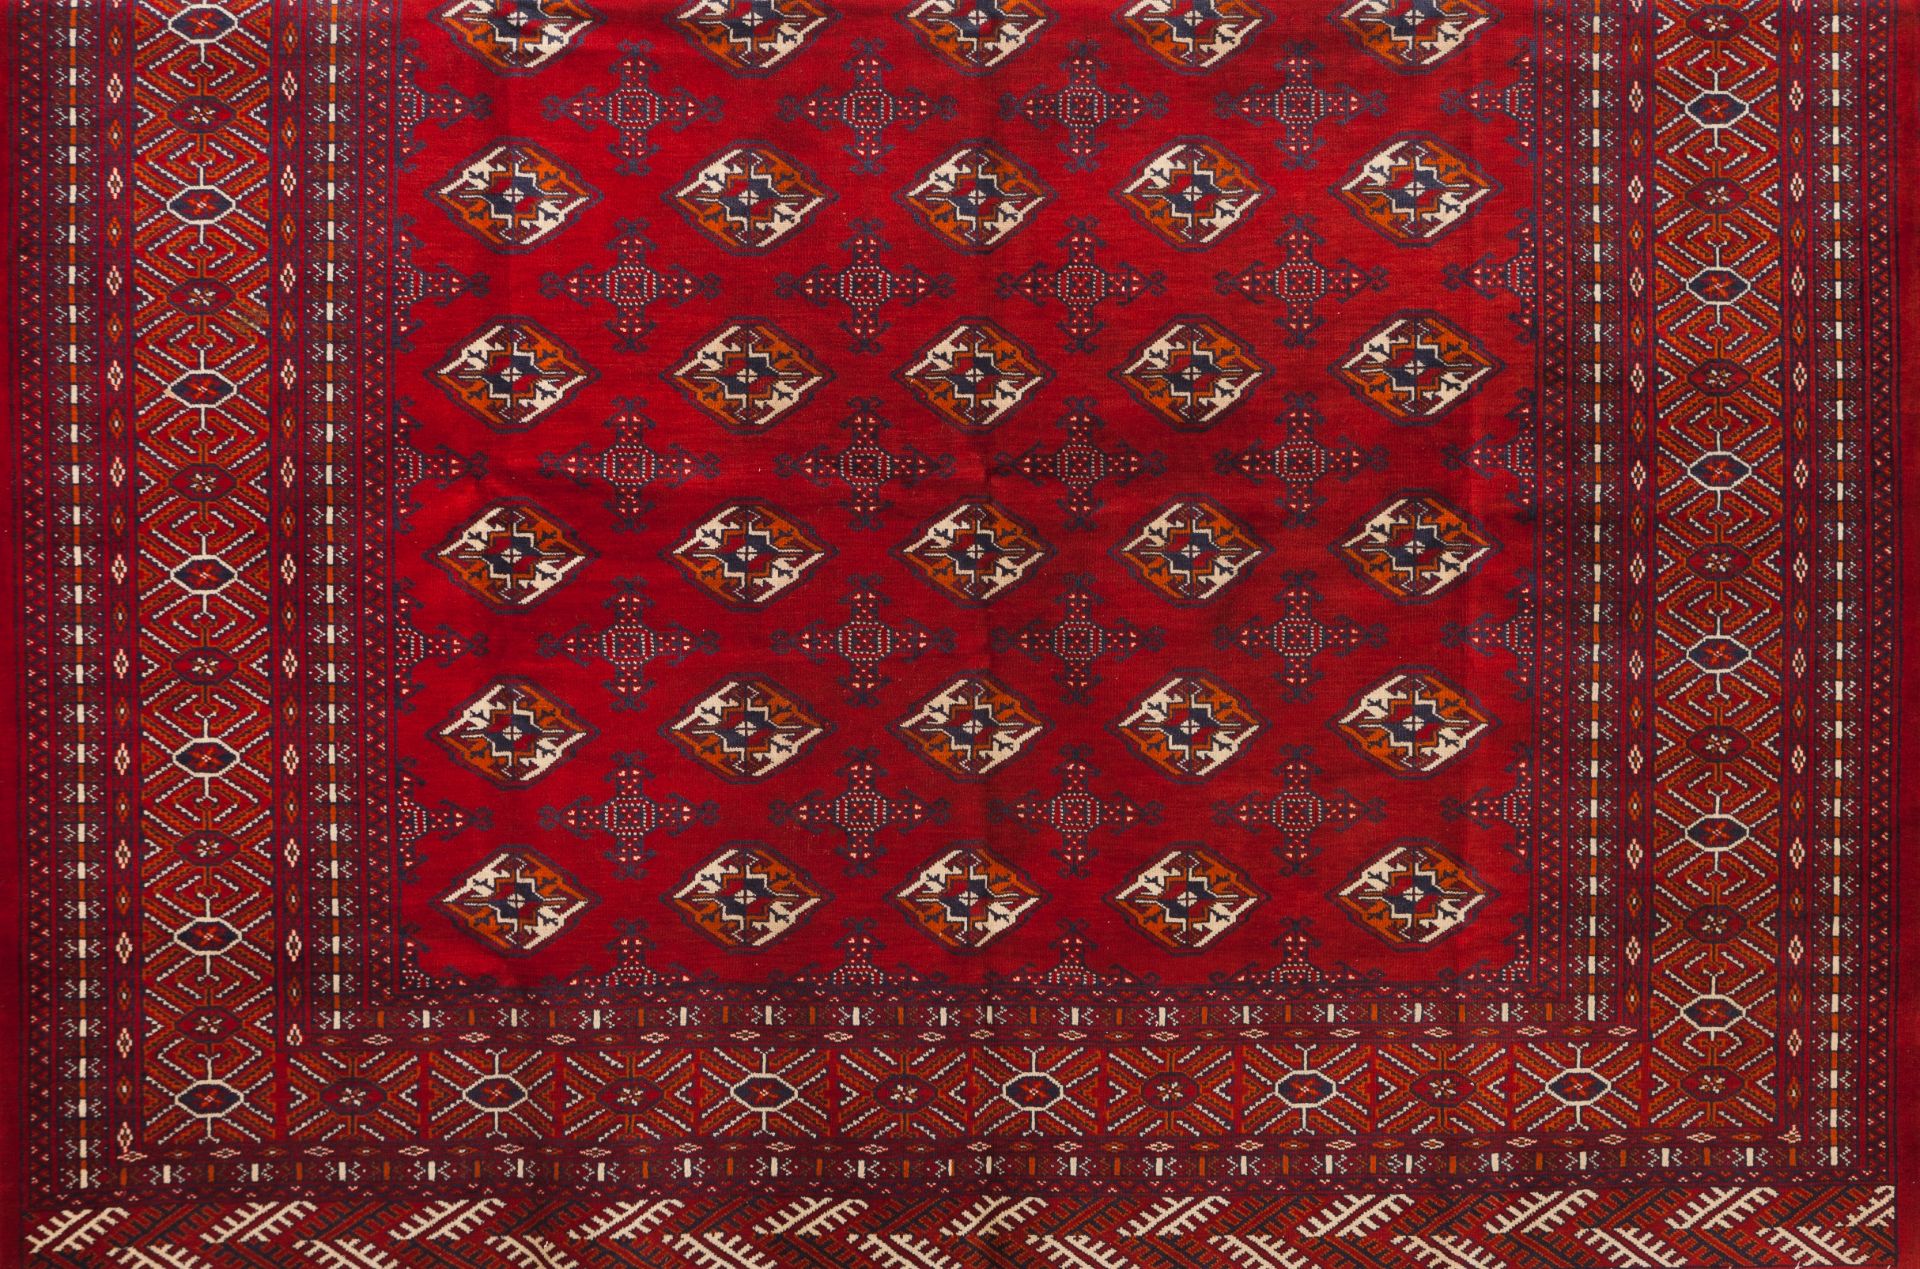 A Bukhara rug, IranWool and cotton of geometric pattern in bordeaux and beige340x265 cm